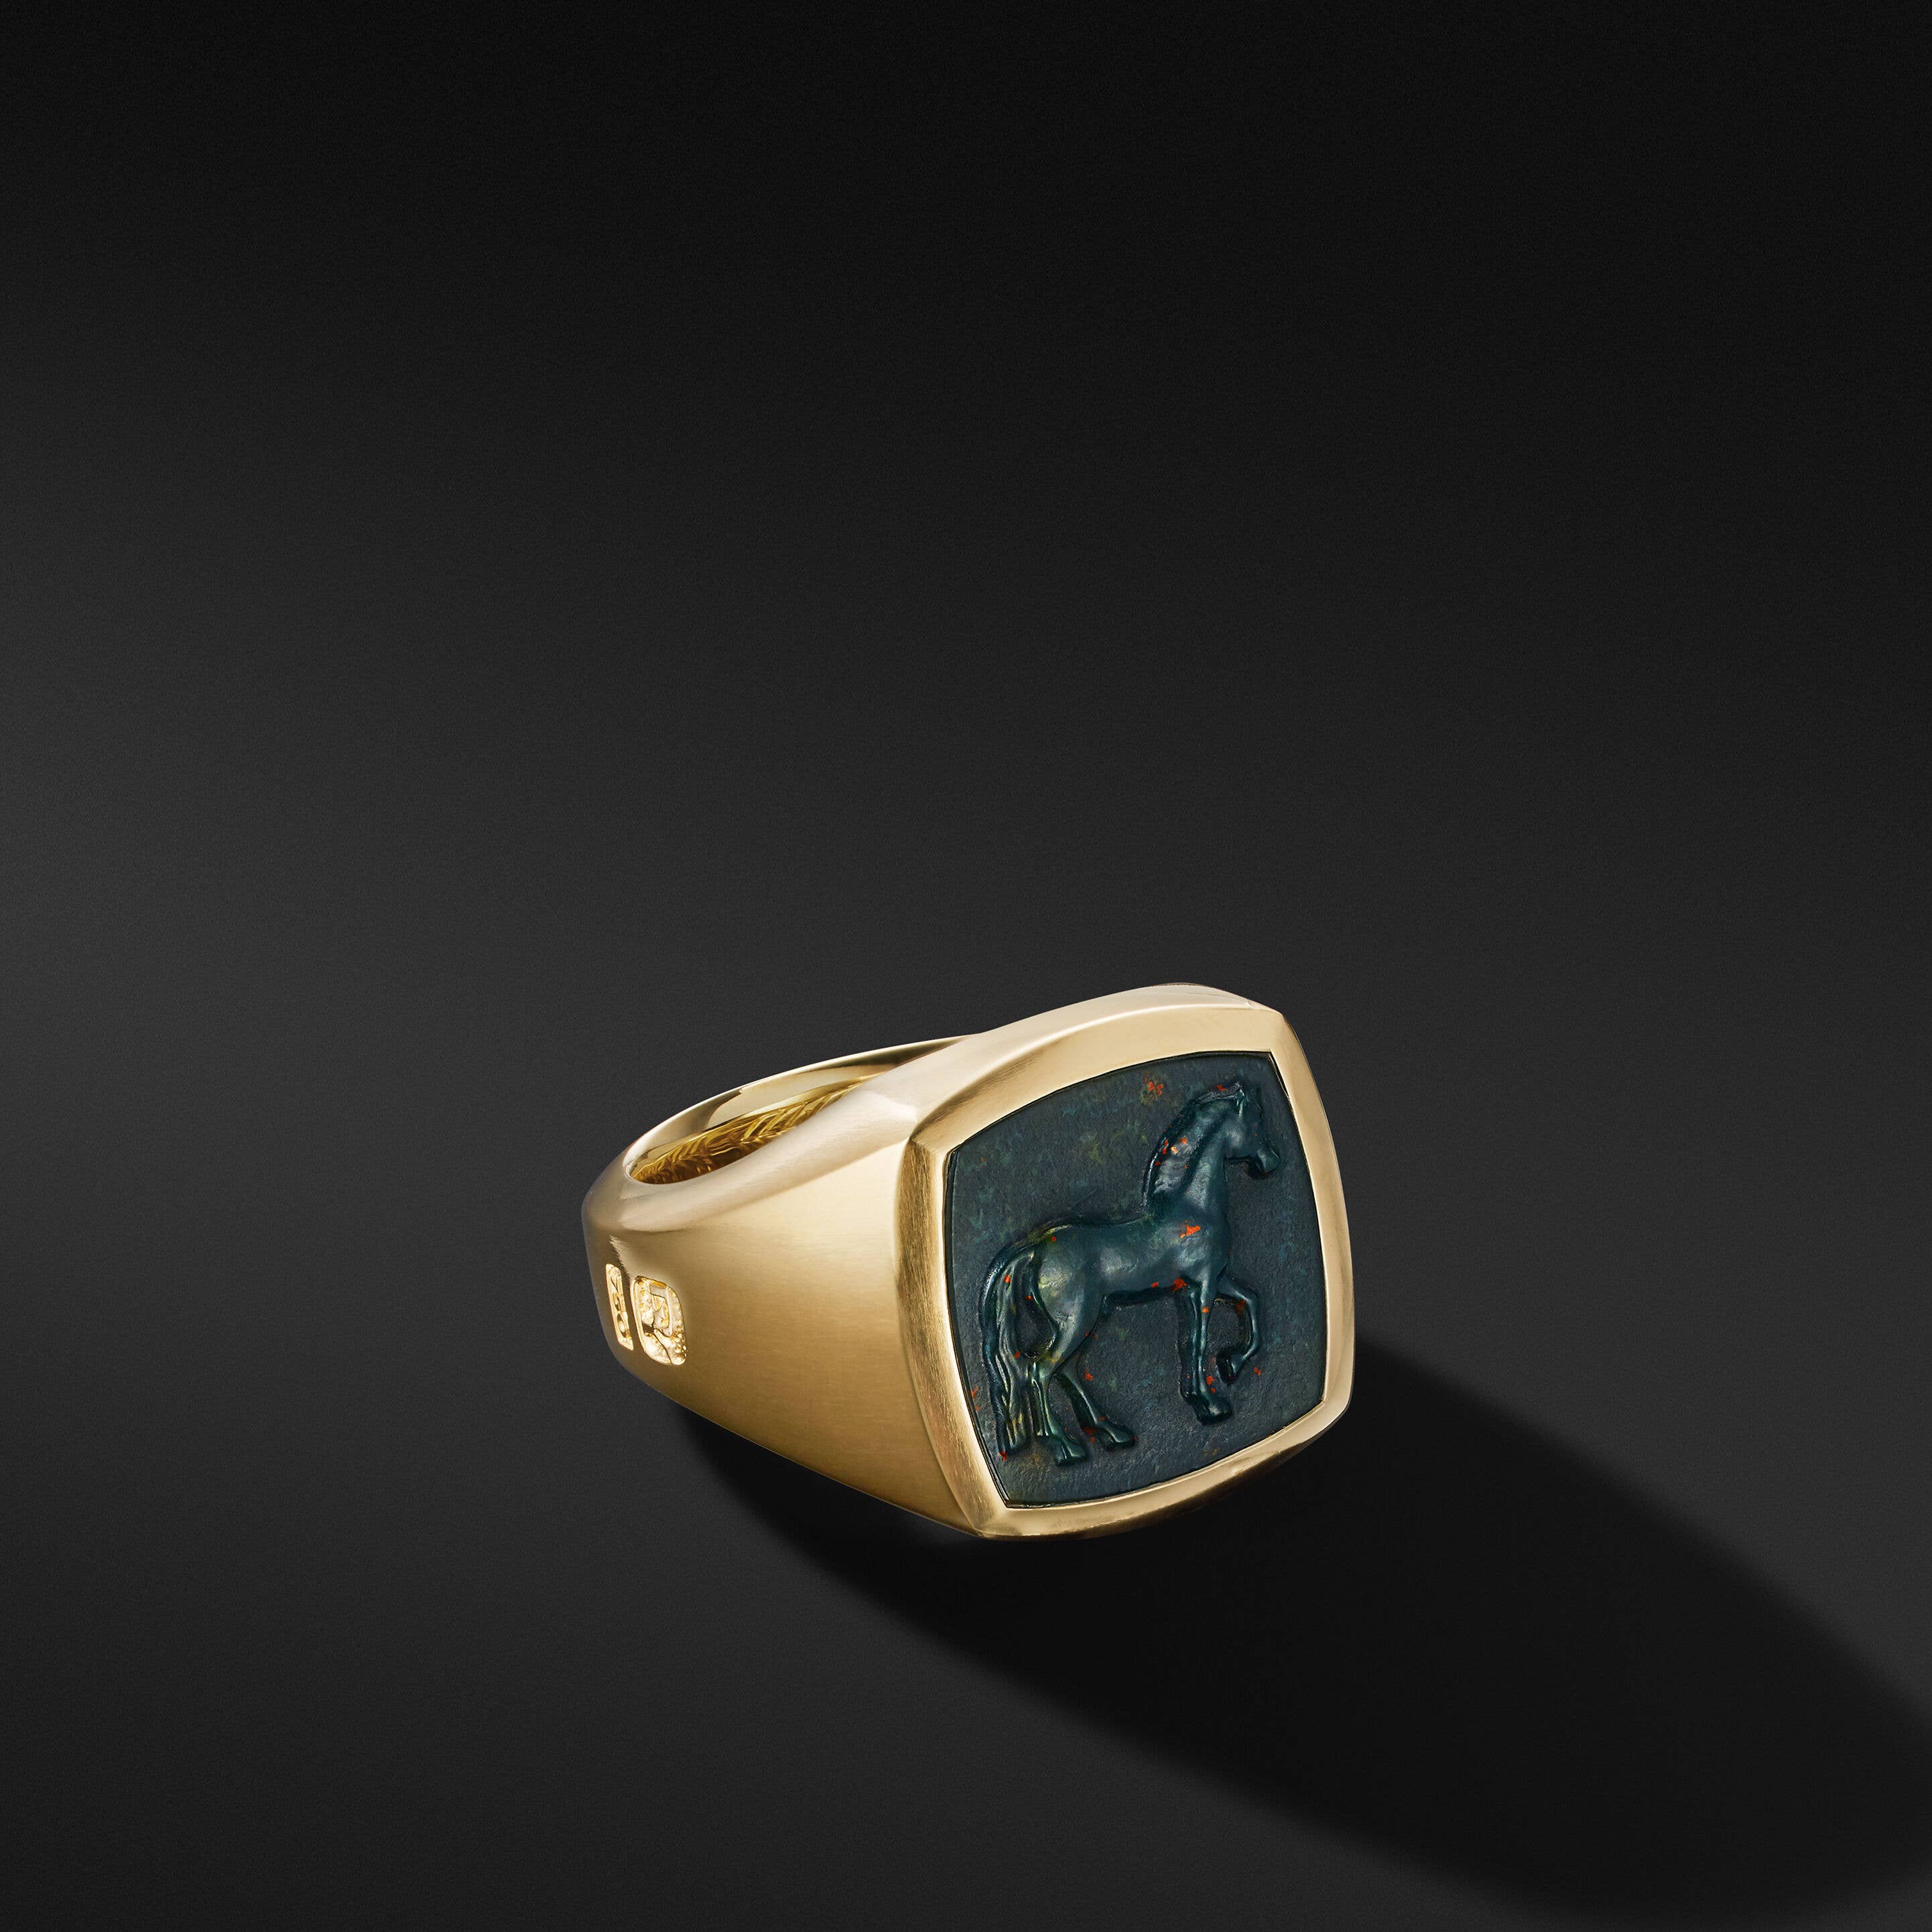 Petrvs® Horse Signet Ring in 18K Yellow Gold with Bloodstone